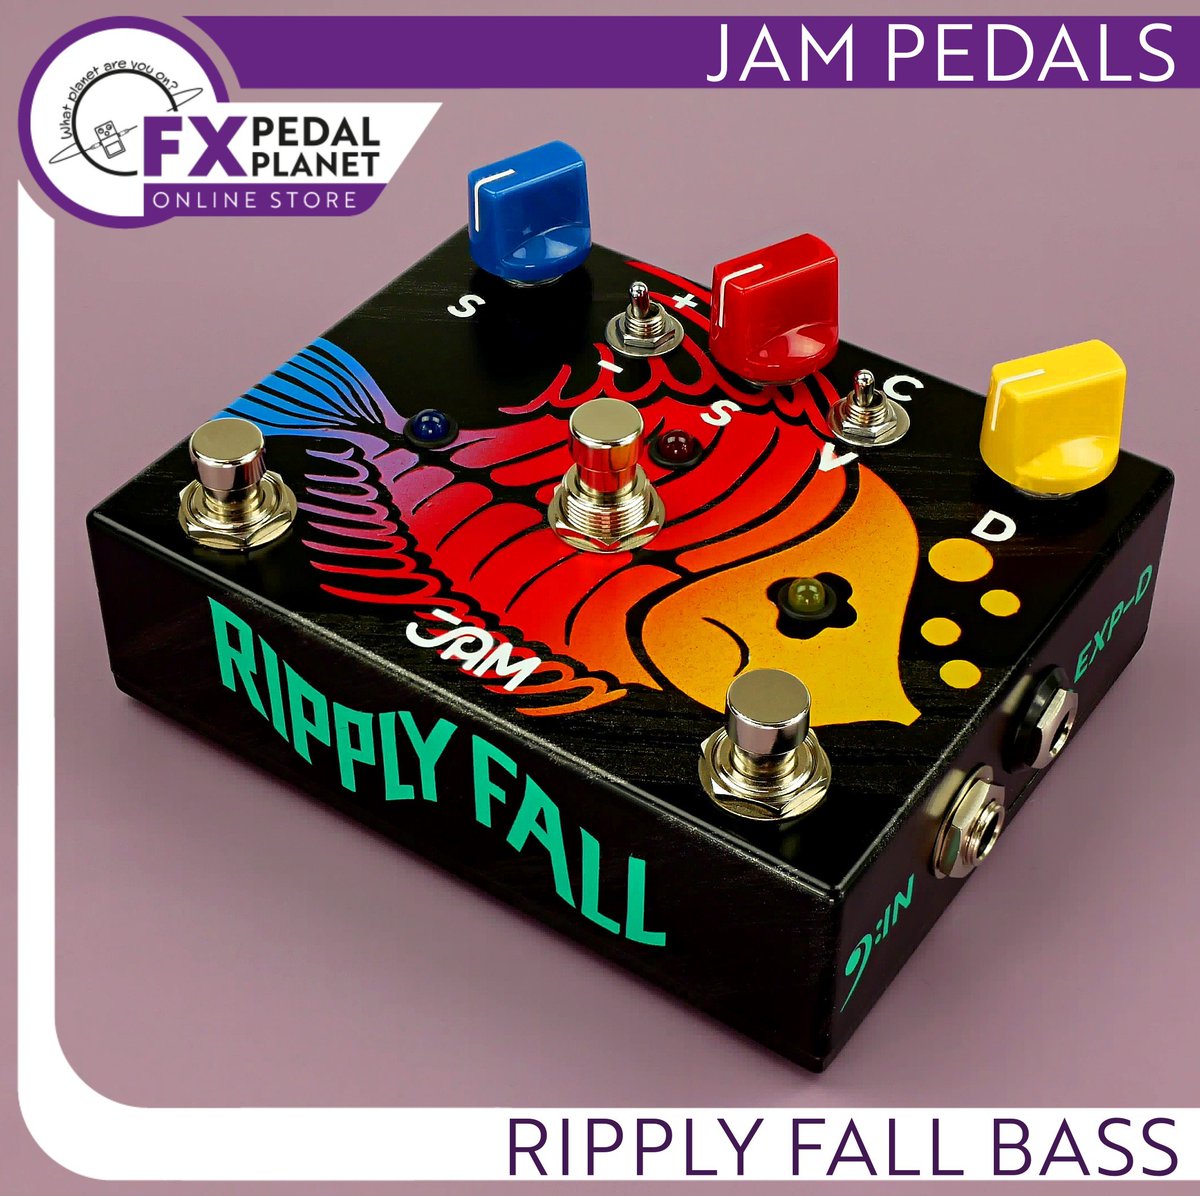 @jampedals Ripply Fall Bass

fxpedalplanet.co.uk/product/jam-pe…

#fxpedalplanet #fxpedalplanetonlinestore 

#jampedals #jampedalsripplyfallbass #choruspedal #vibratopedal #phaserpedal #artforyourears 

#boutiqueeffectspedals #effectspedals #guitareffects #basseffects #basseffectspedals